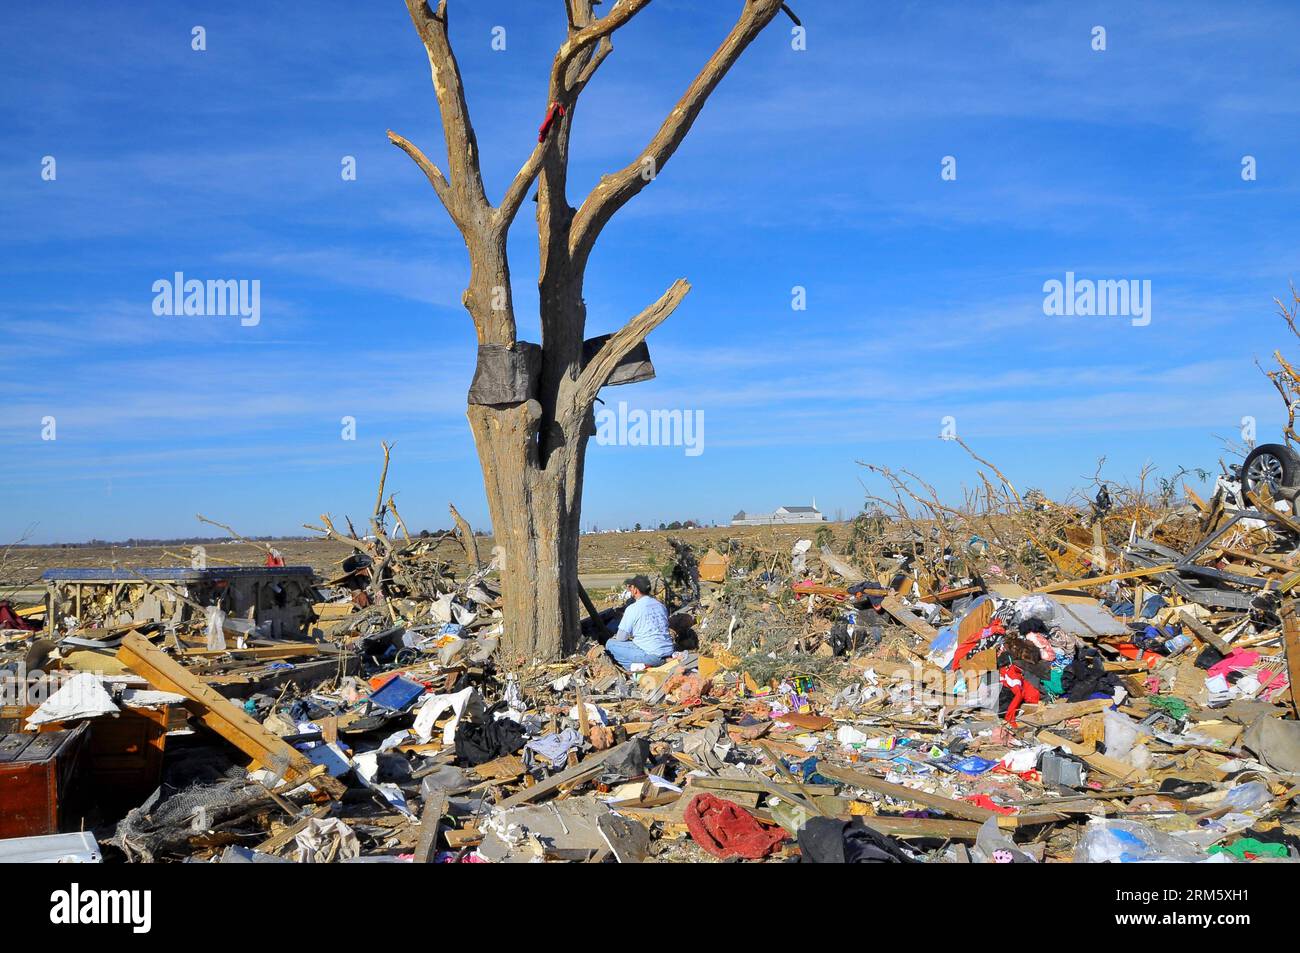 Bildnummer: 60732979  Datum: 19.11.2013  Copyright: imago/Xinhua ILLINOIS, Nov. 19, 2013 (Xinhua) -- A local resident sits in ruins after a tornado attack in the town of Washington in Illinois, the United States, on Nov. 19, 2013. At least 16 were killed during tornado attacks on Sunday, according to the National Weather Service. (Xinhua/Zhang Baoping)(ybg) US-ILLINOIS-TORNADO PUBLICATIONxNOTxINxCHN Gesellschaft USA Naturkatastrophe x0x xsk 2013 quer Aufmacher premiumd     60732979 Date 19 11 2013 Copyright Imago XINHUA Illinois Nov 19 2013 XINHUA a Local Resident sits in Ruins After a Tornado Stock Photo